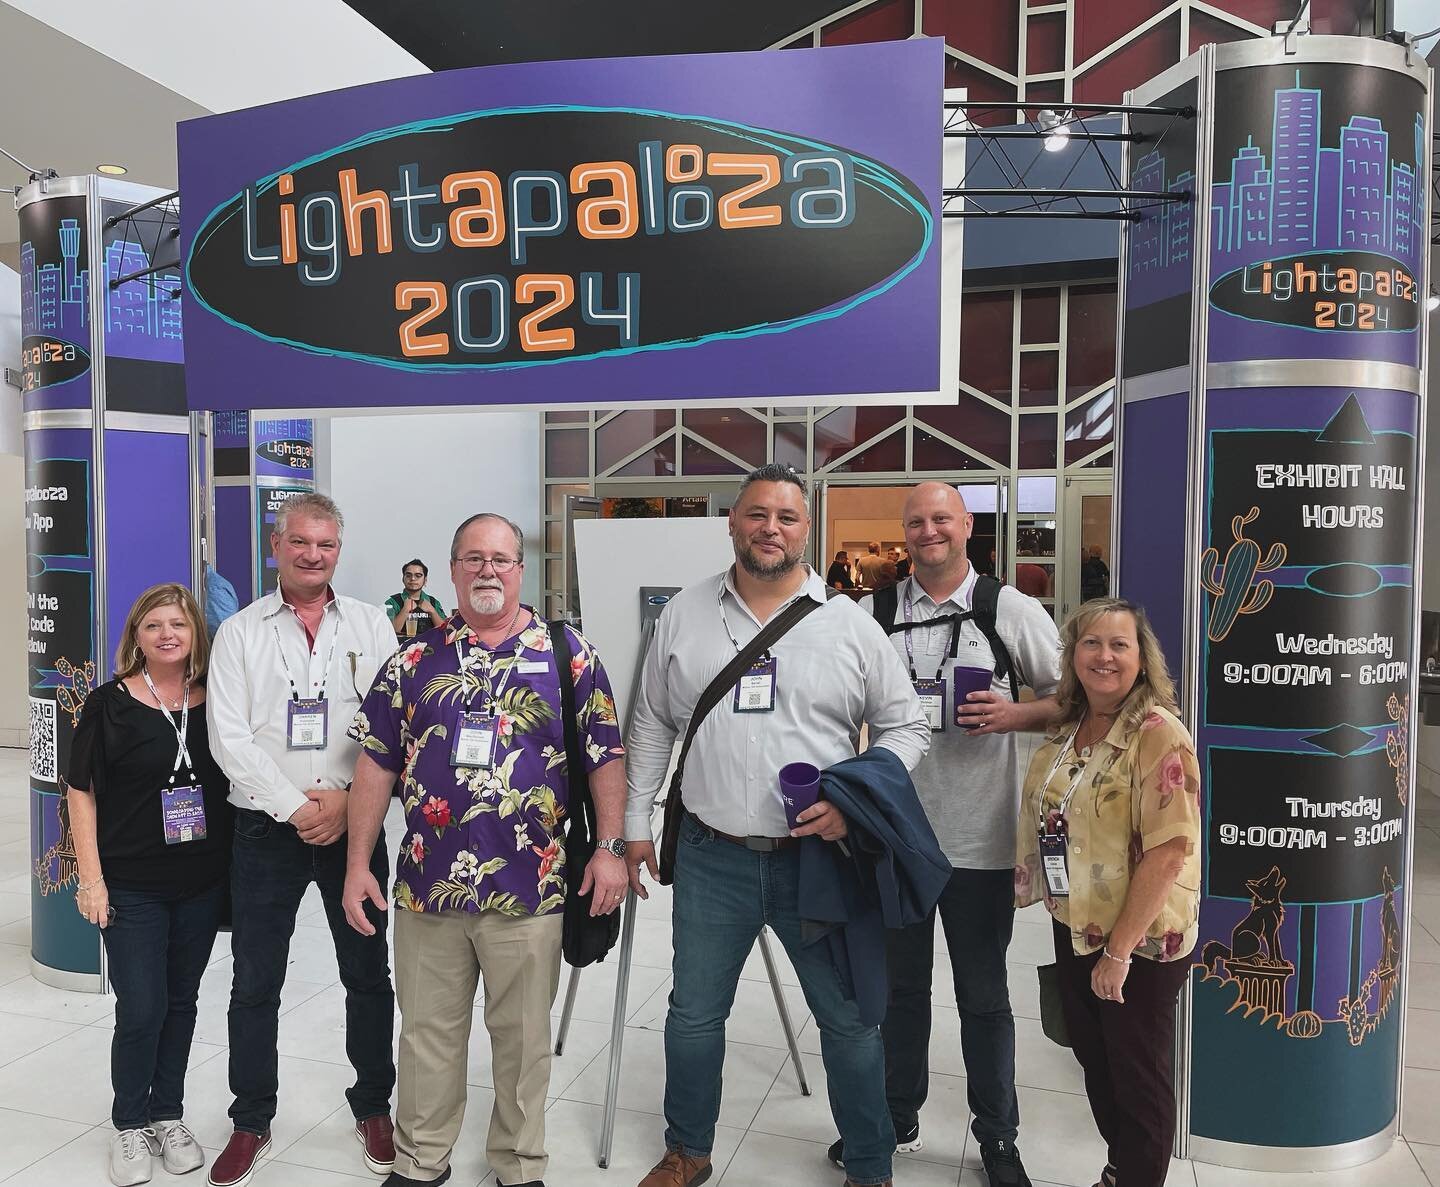 MTA is thrilled to be at Lightapalooza, learning more from our partners and the exciting lighting options!! Be sure to say hello if you are attending.